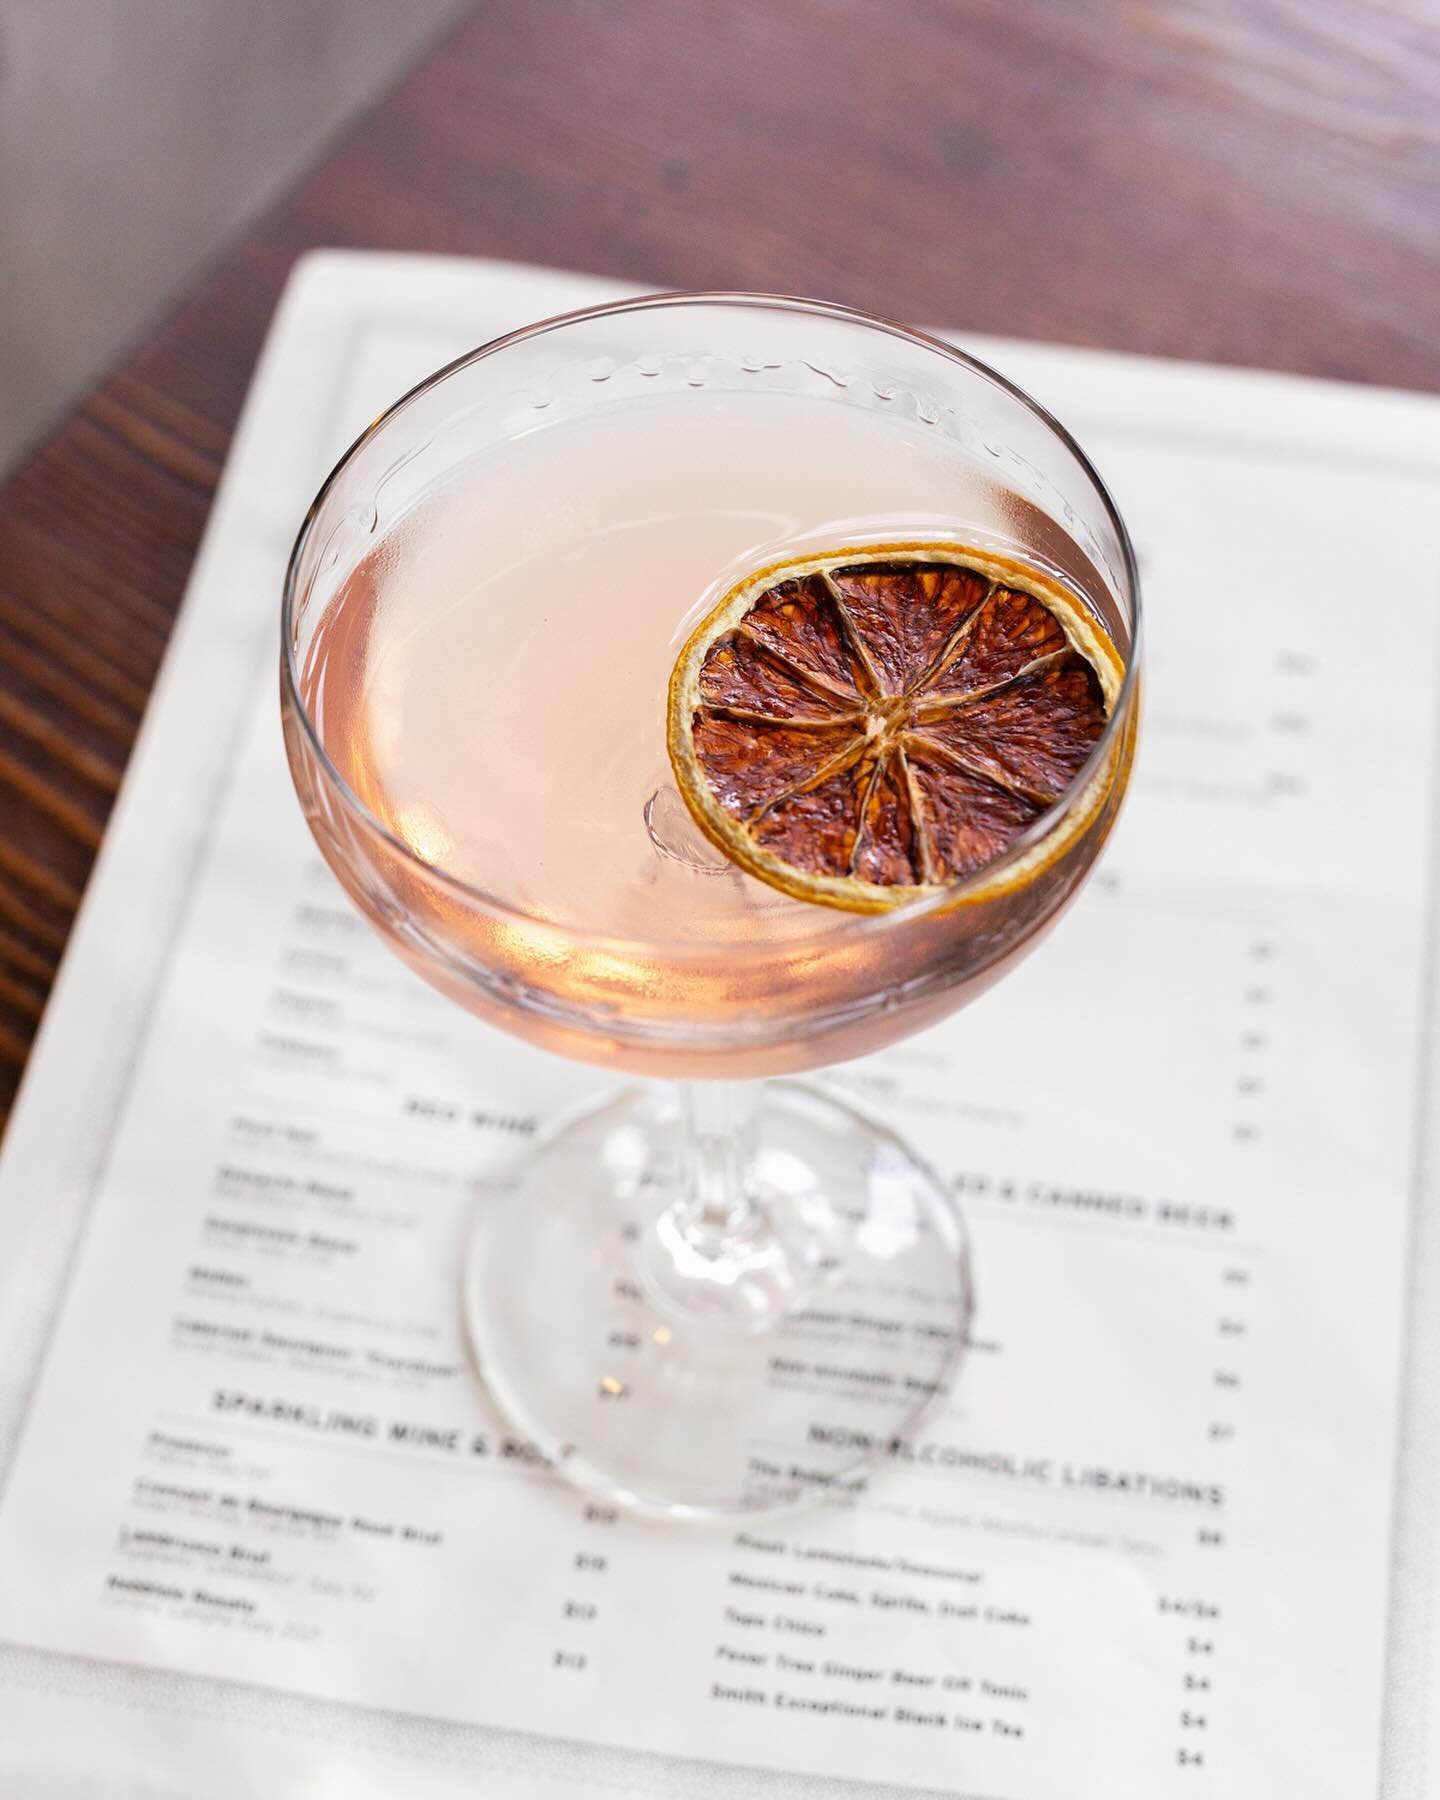 Thorns game tonight? Swing by before kick-off and raise a glass with our City of Roses cocktail! 🌹 Made with Freeland Gin, Portland Potato Vodka, Rose Vermouth, and Peychaud&rsquo;s Bitters, it&rsquo;s a true tribute to the Rose City in a glass. Che